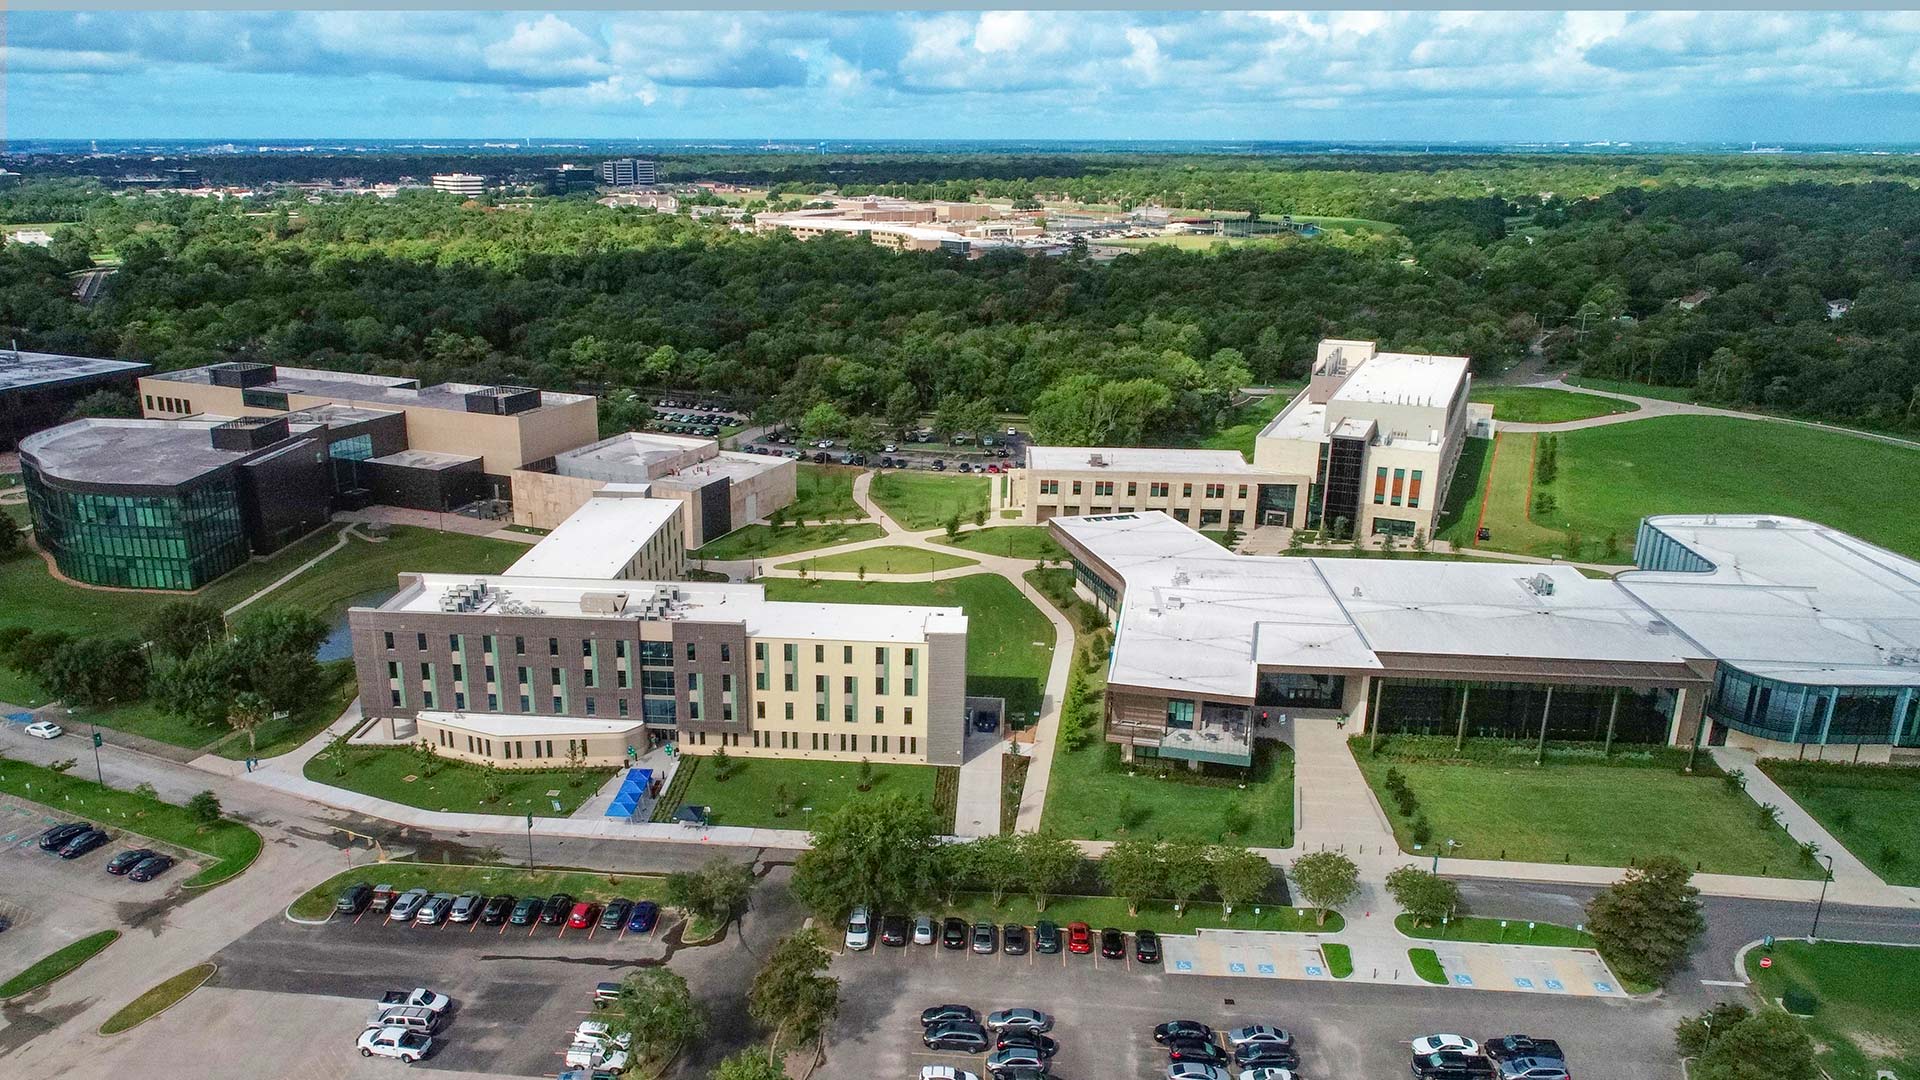 U.S. News and World Report’s Best Colleges ranking elevates UHCL to national designation